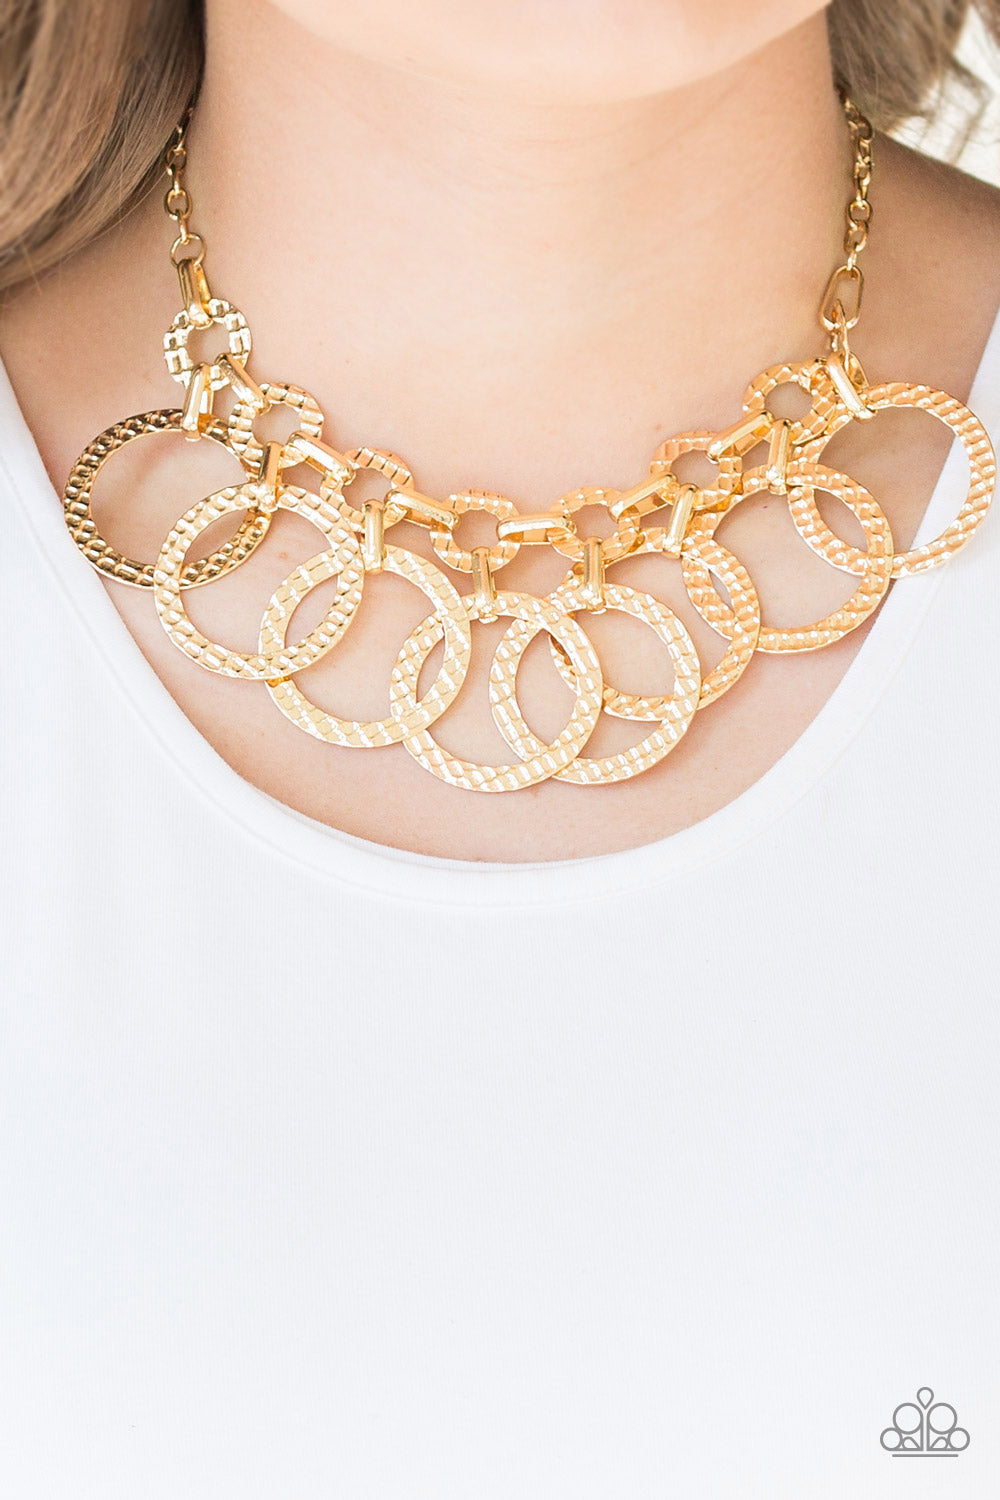 Jammin Jungle - Gold Necklace - TheMasterCollection